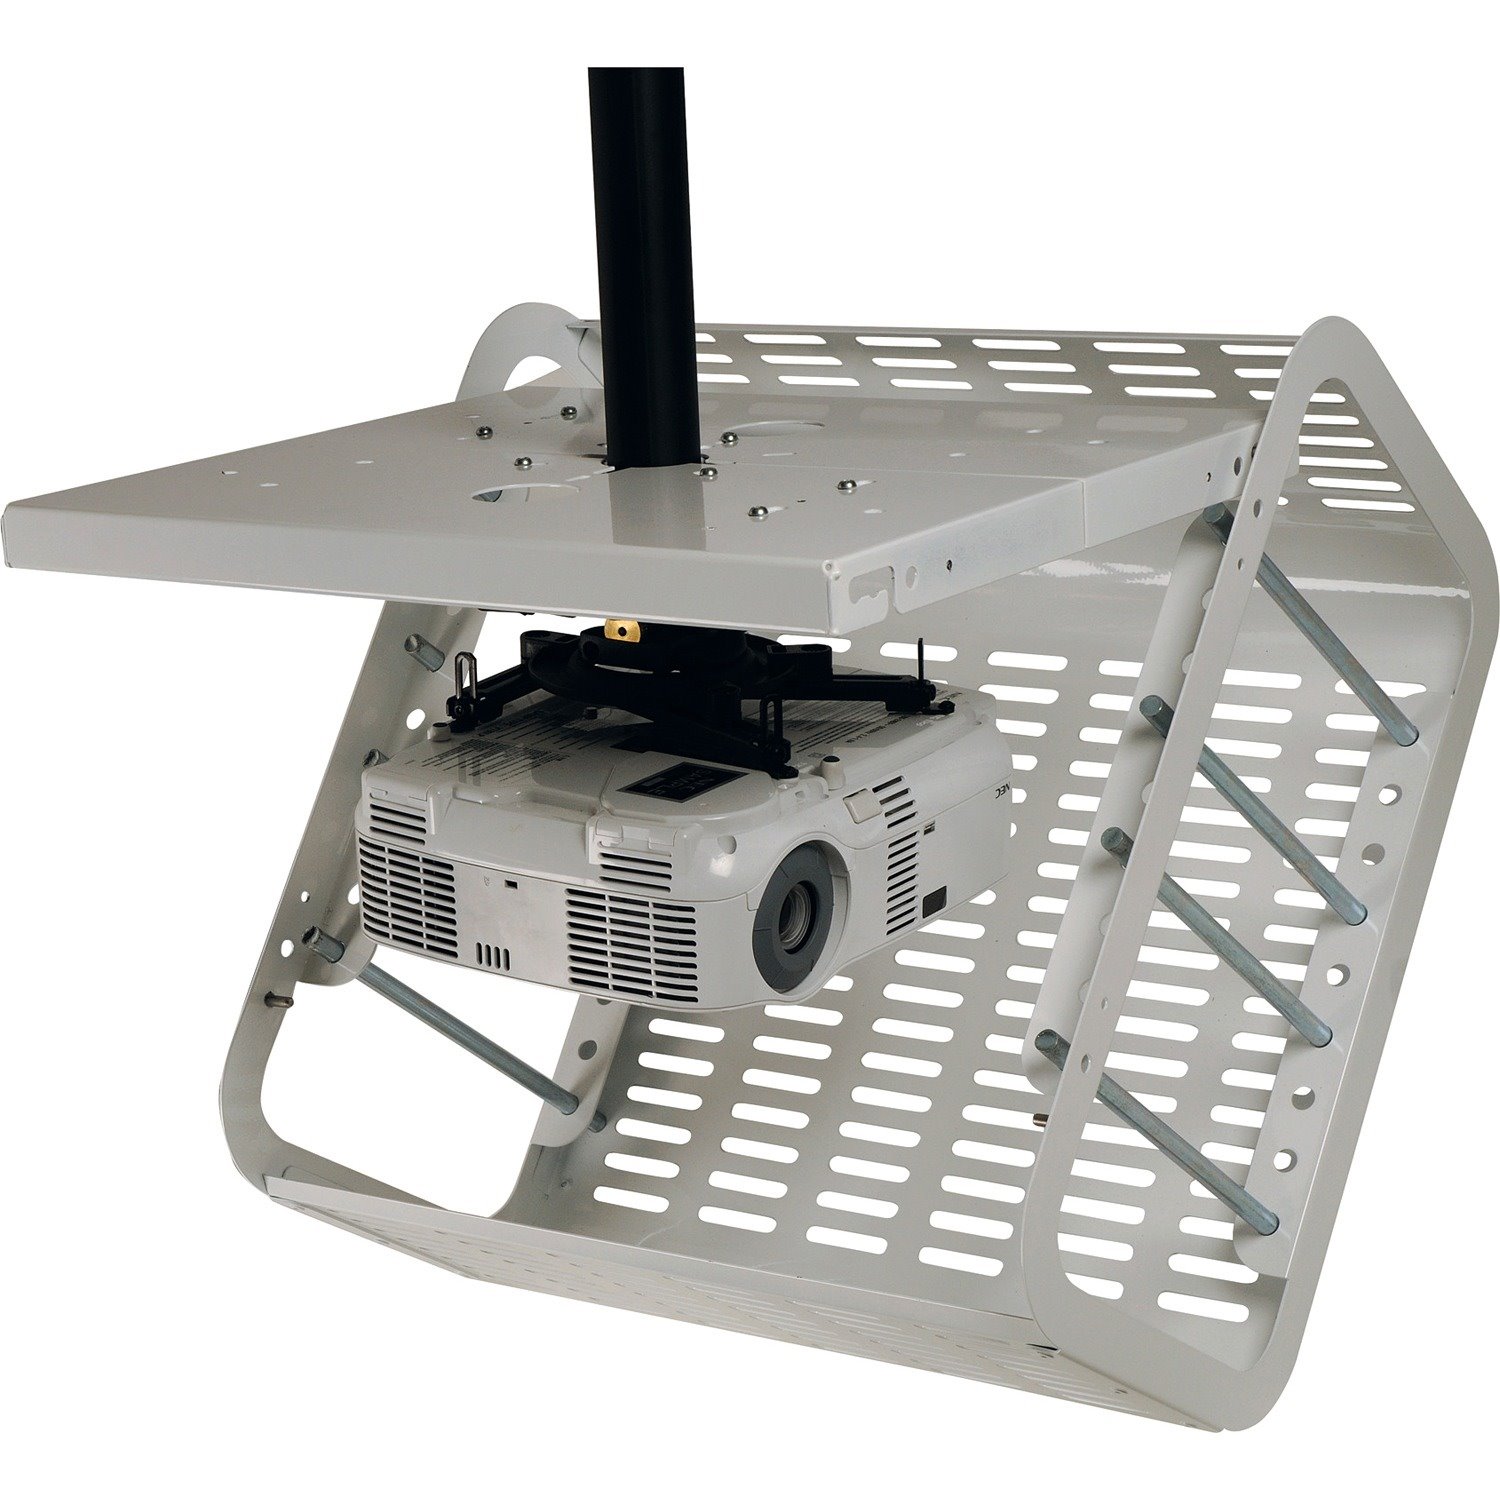 Peerless-AV Projector Enclosure For use with Projector Mounts